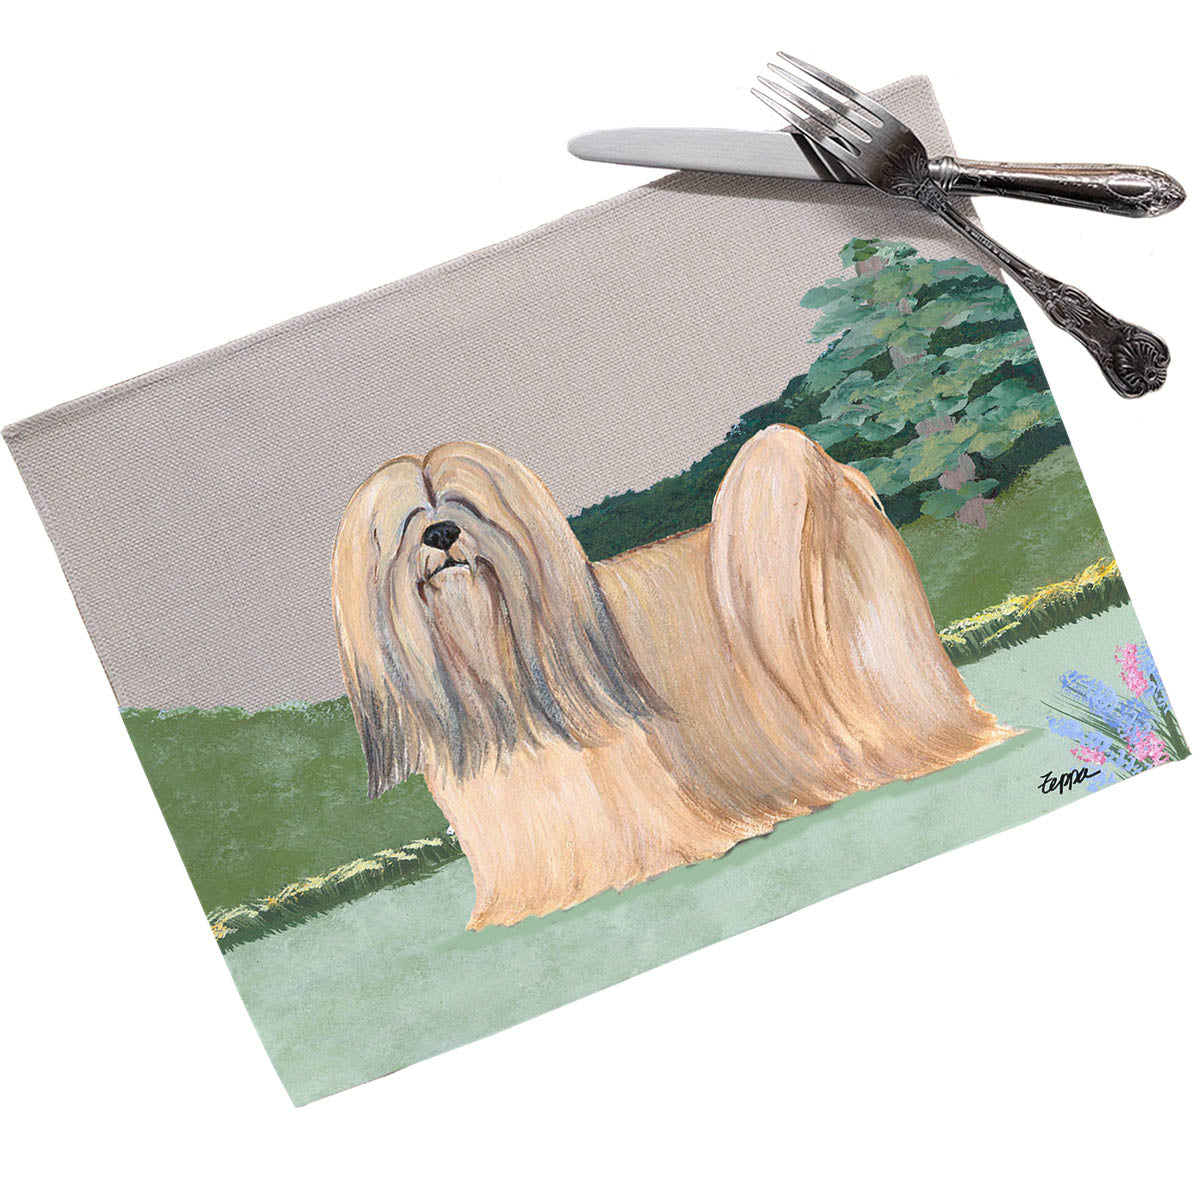 Lhasa Apso Scenic Placemats